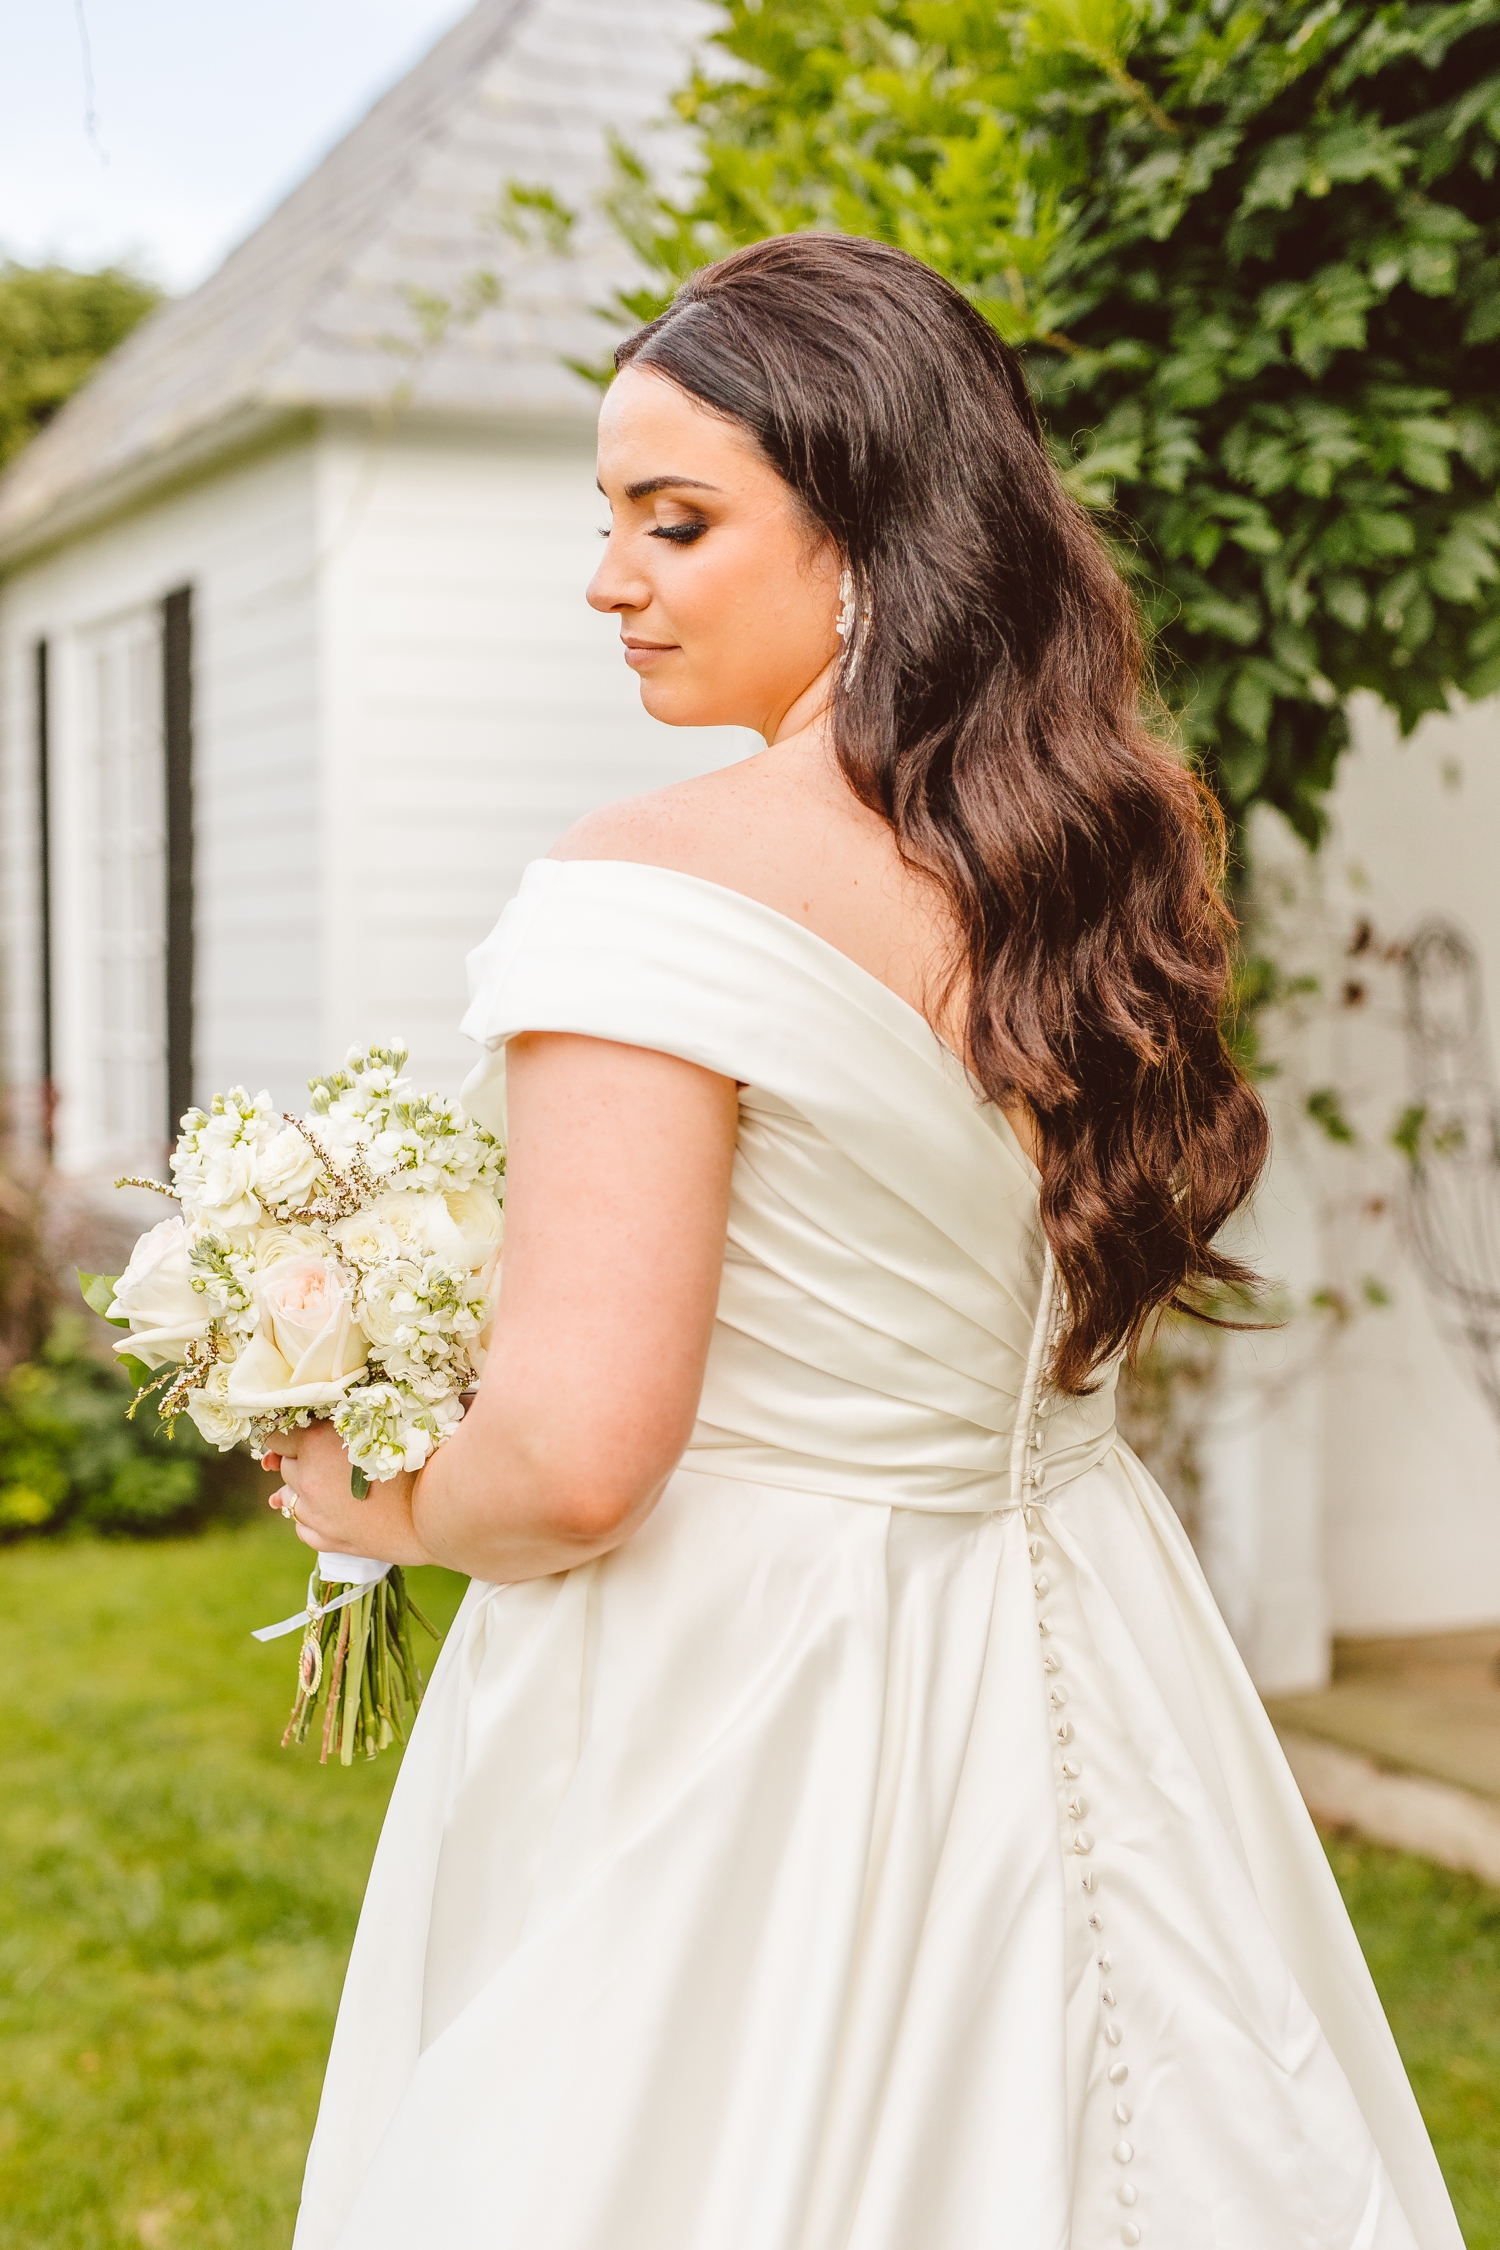 Bride wearing off the shoulder dress and looking away from camera | Brooke Michelle Photo